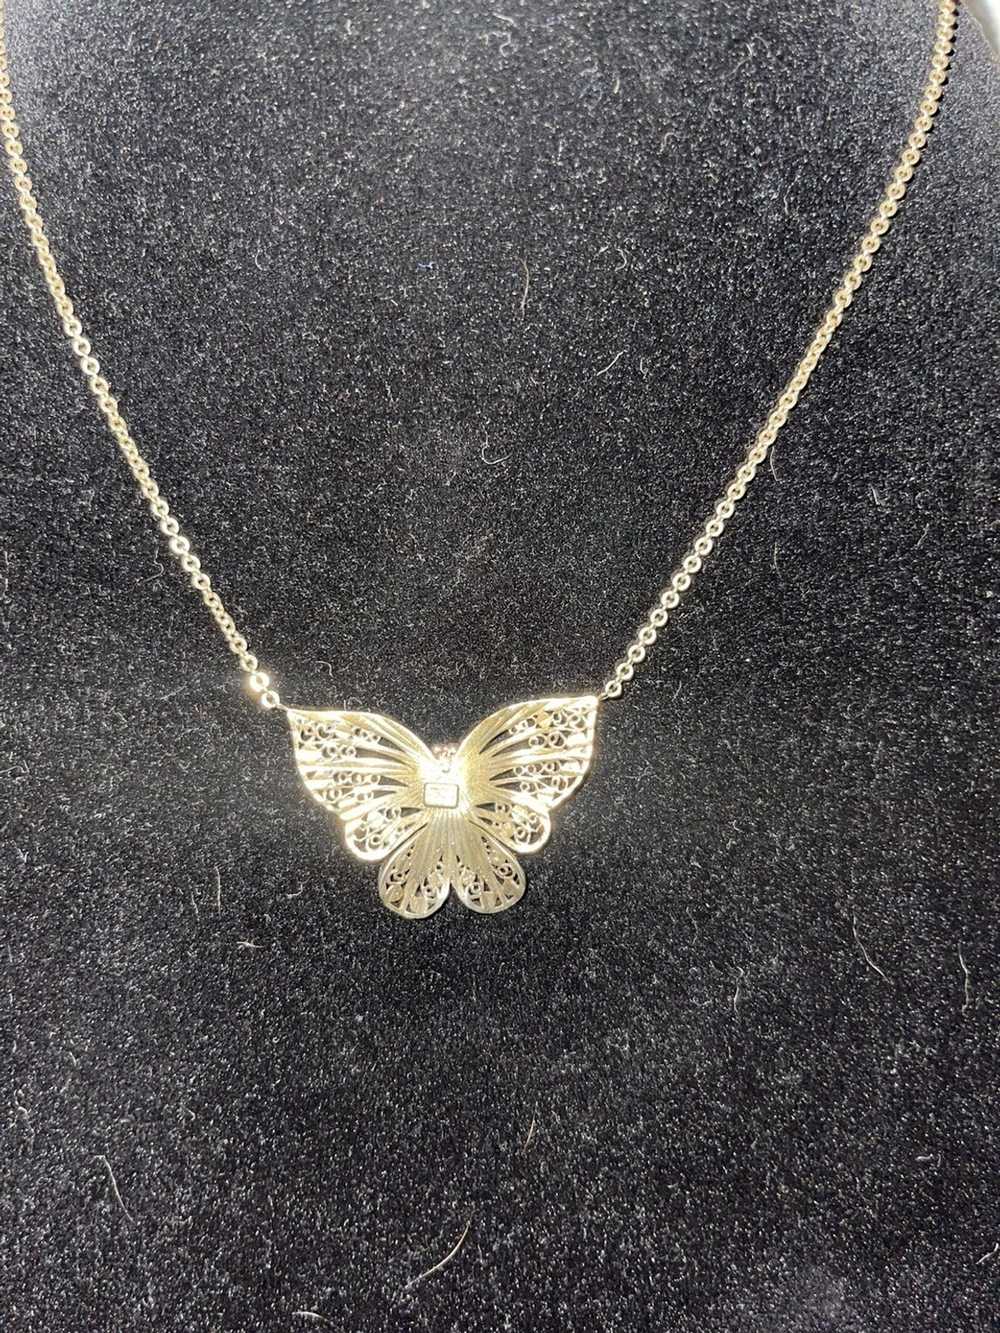 Vintage 14k Tri gold butterfly chain - image 4